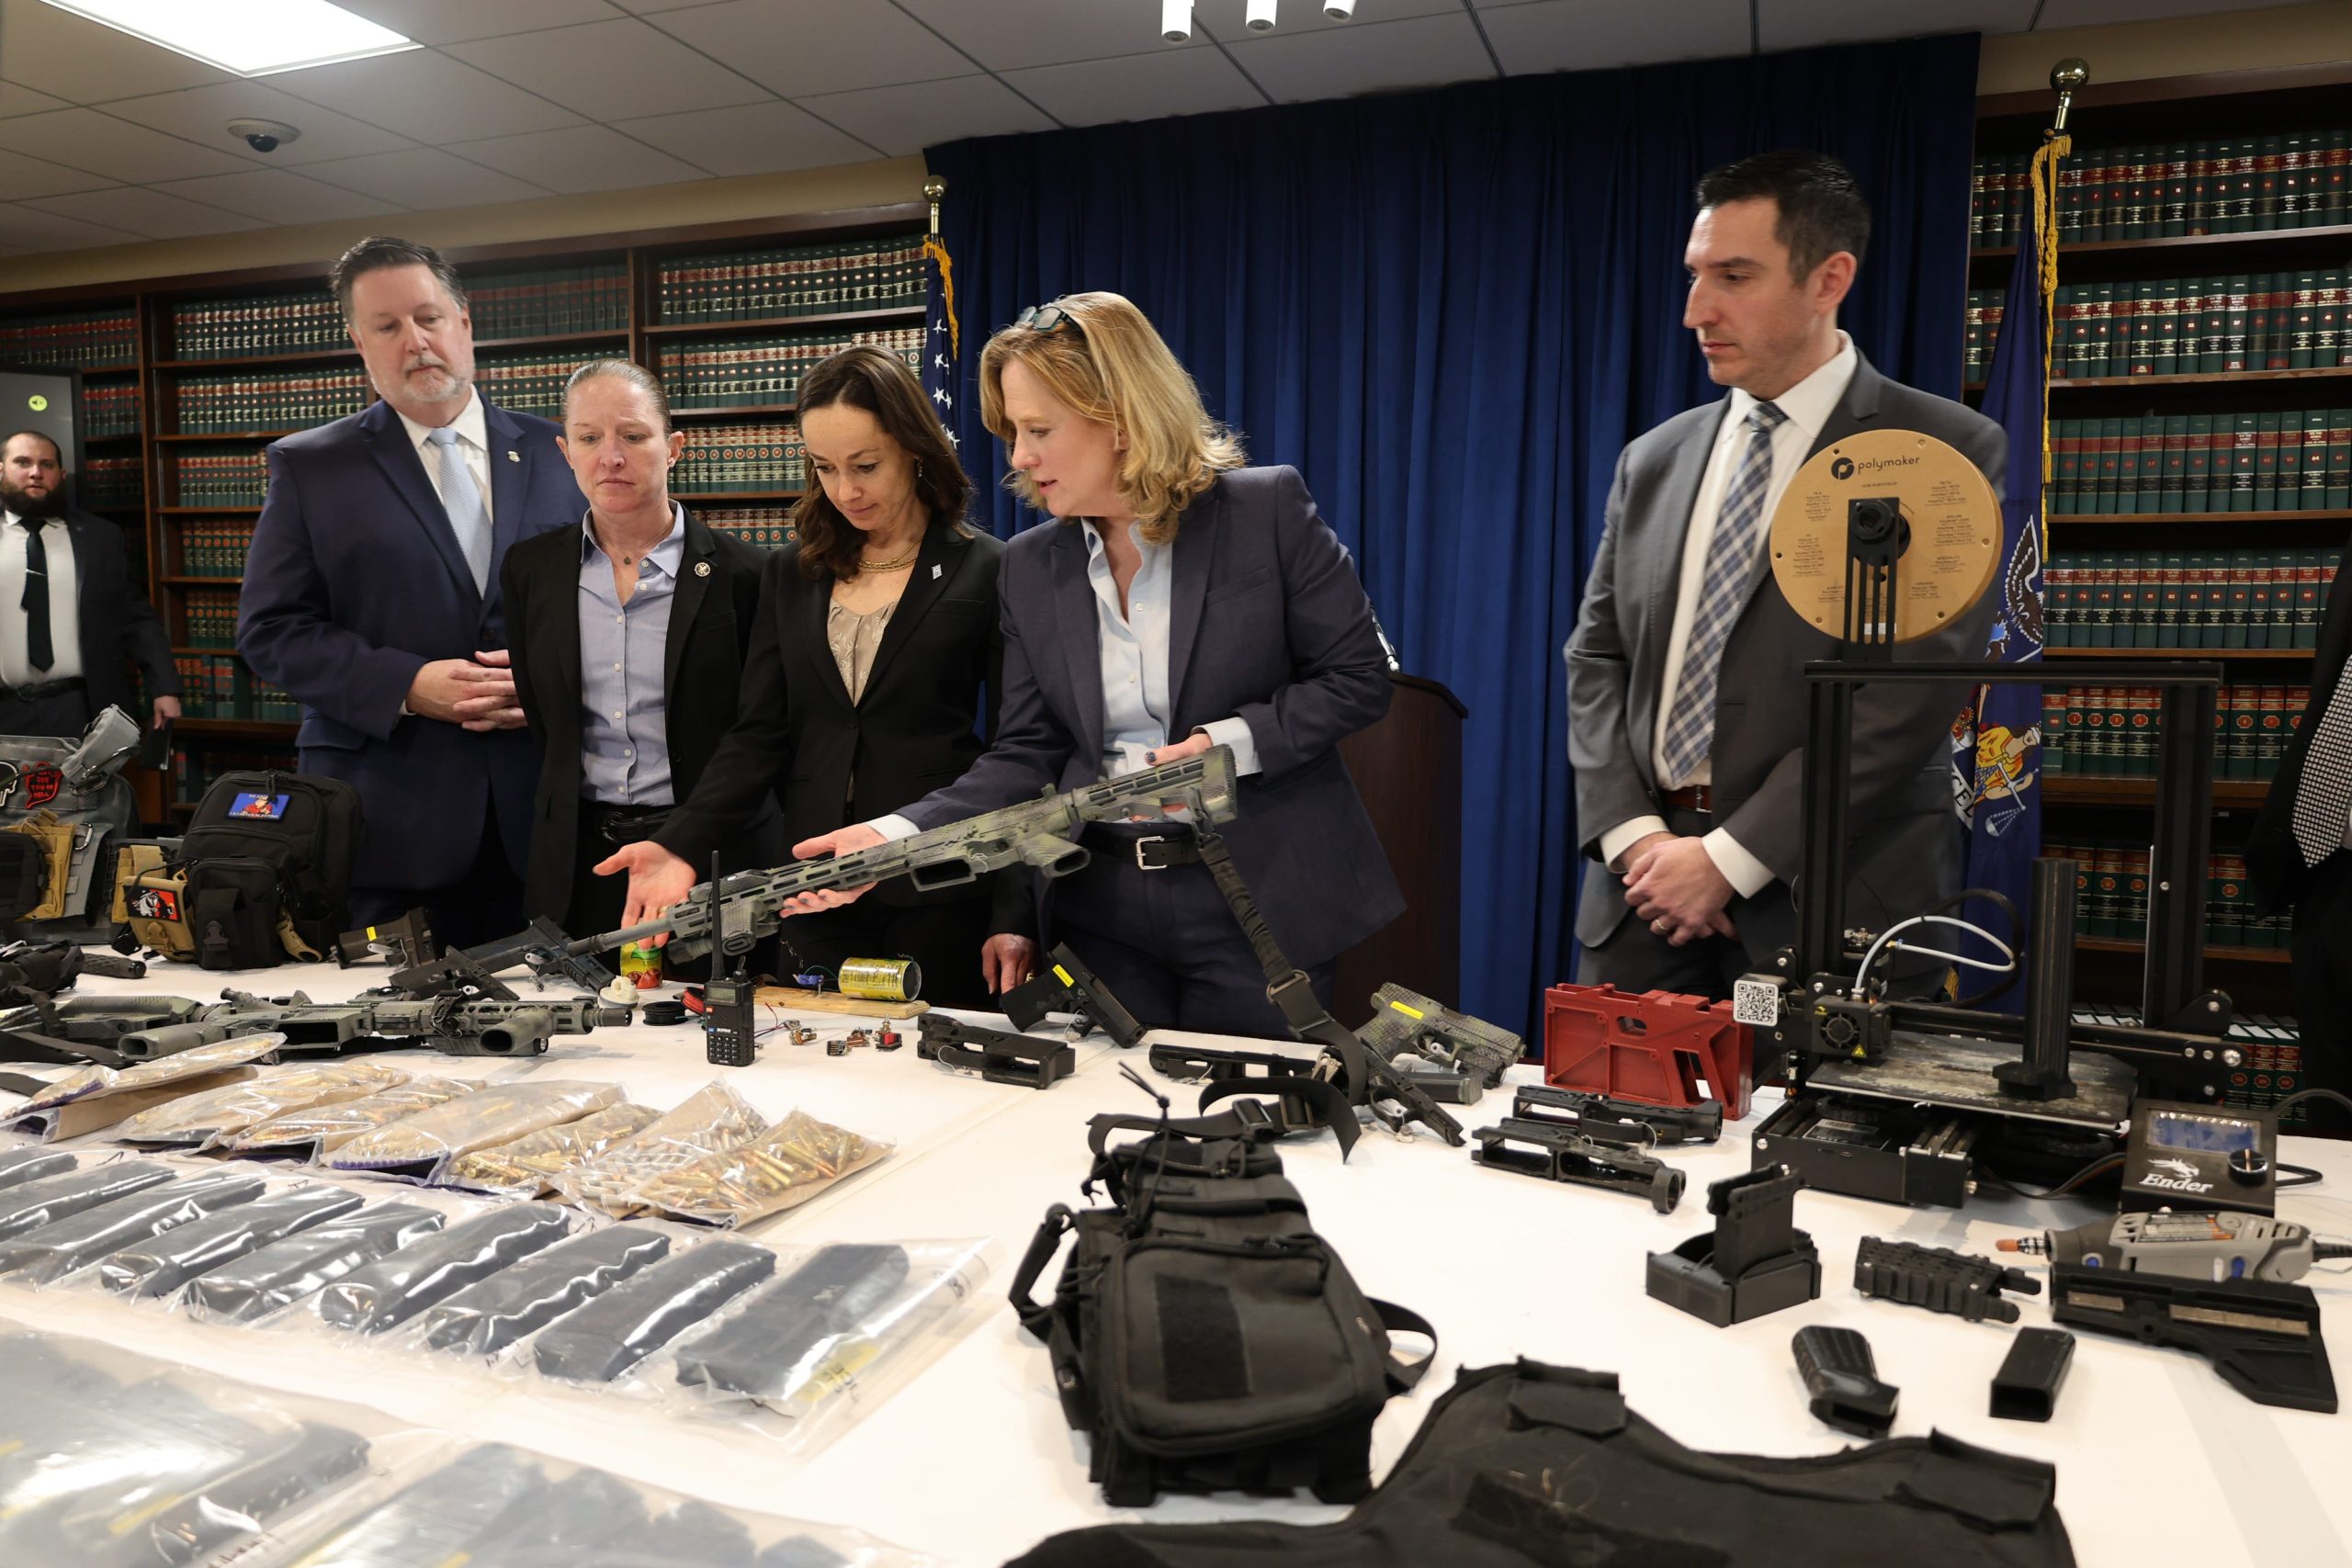 New York City Brothers Indicted for Arsenal of Untraceable Firearms and Homemade Bombs - Archyde